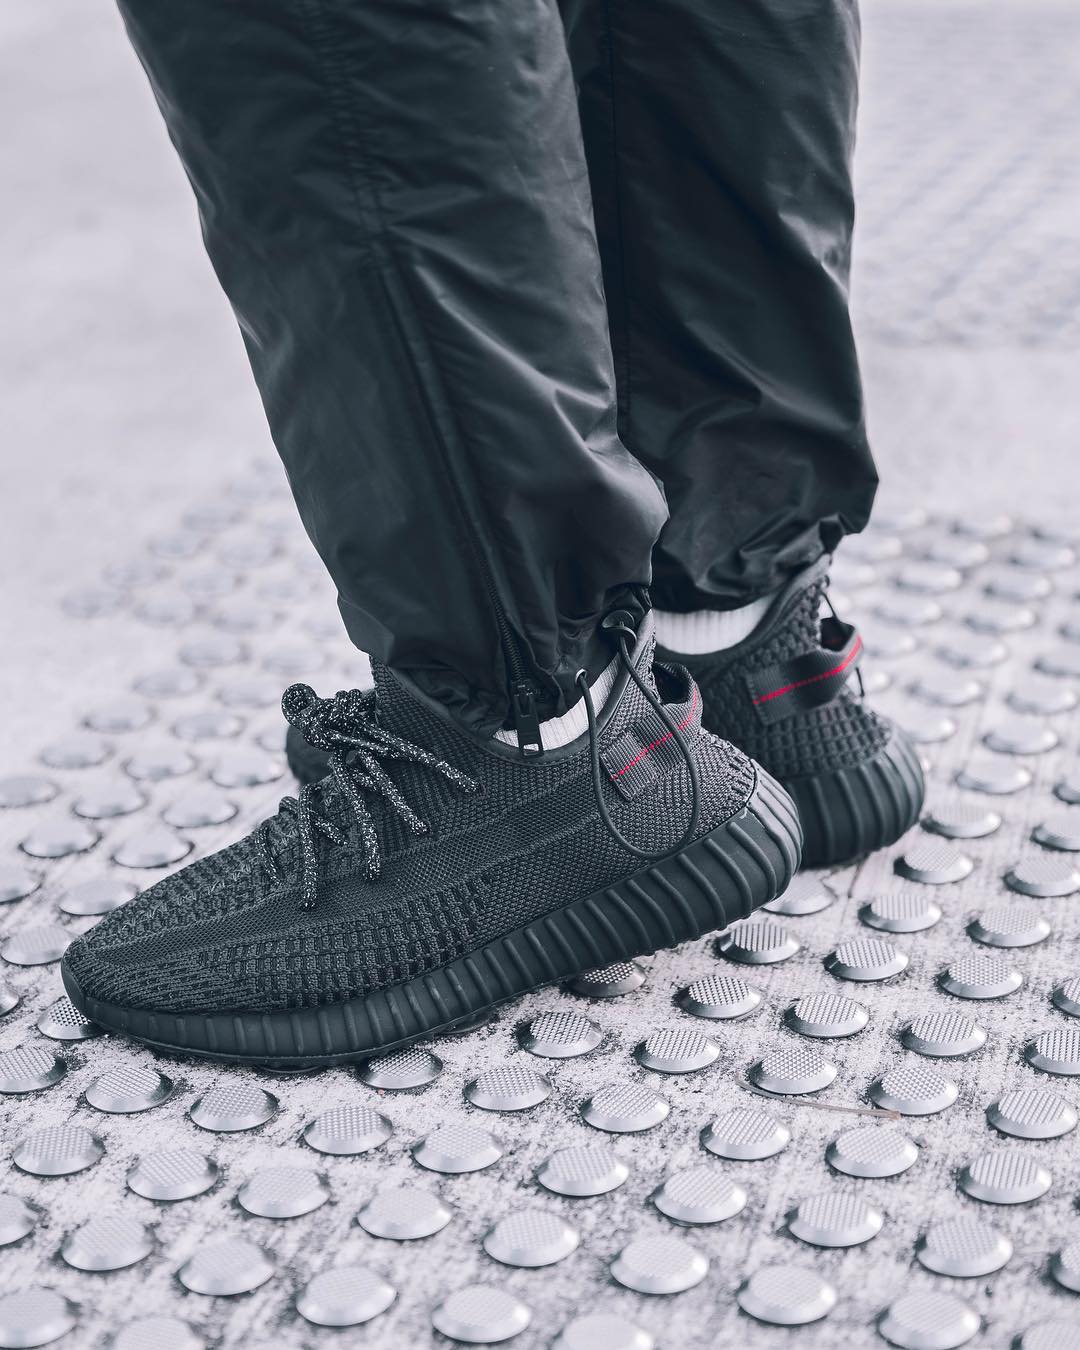 Mam oplichter Gestaag Re-Release of the adidas Yeezy Boost 350 V2 "Black" on Black Friday 